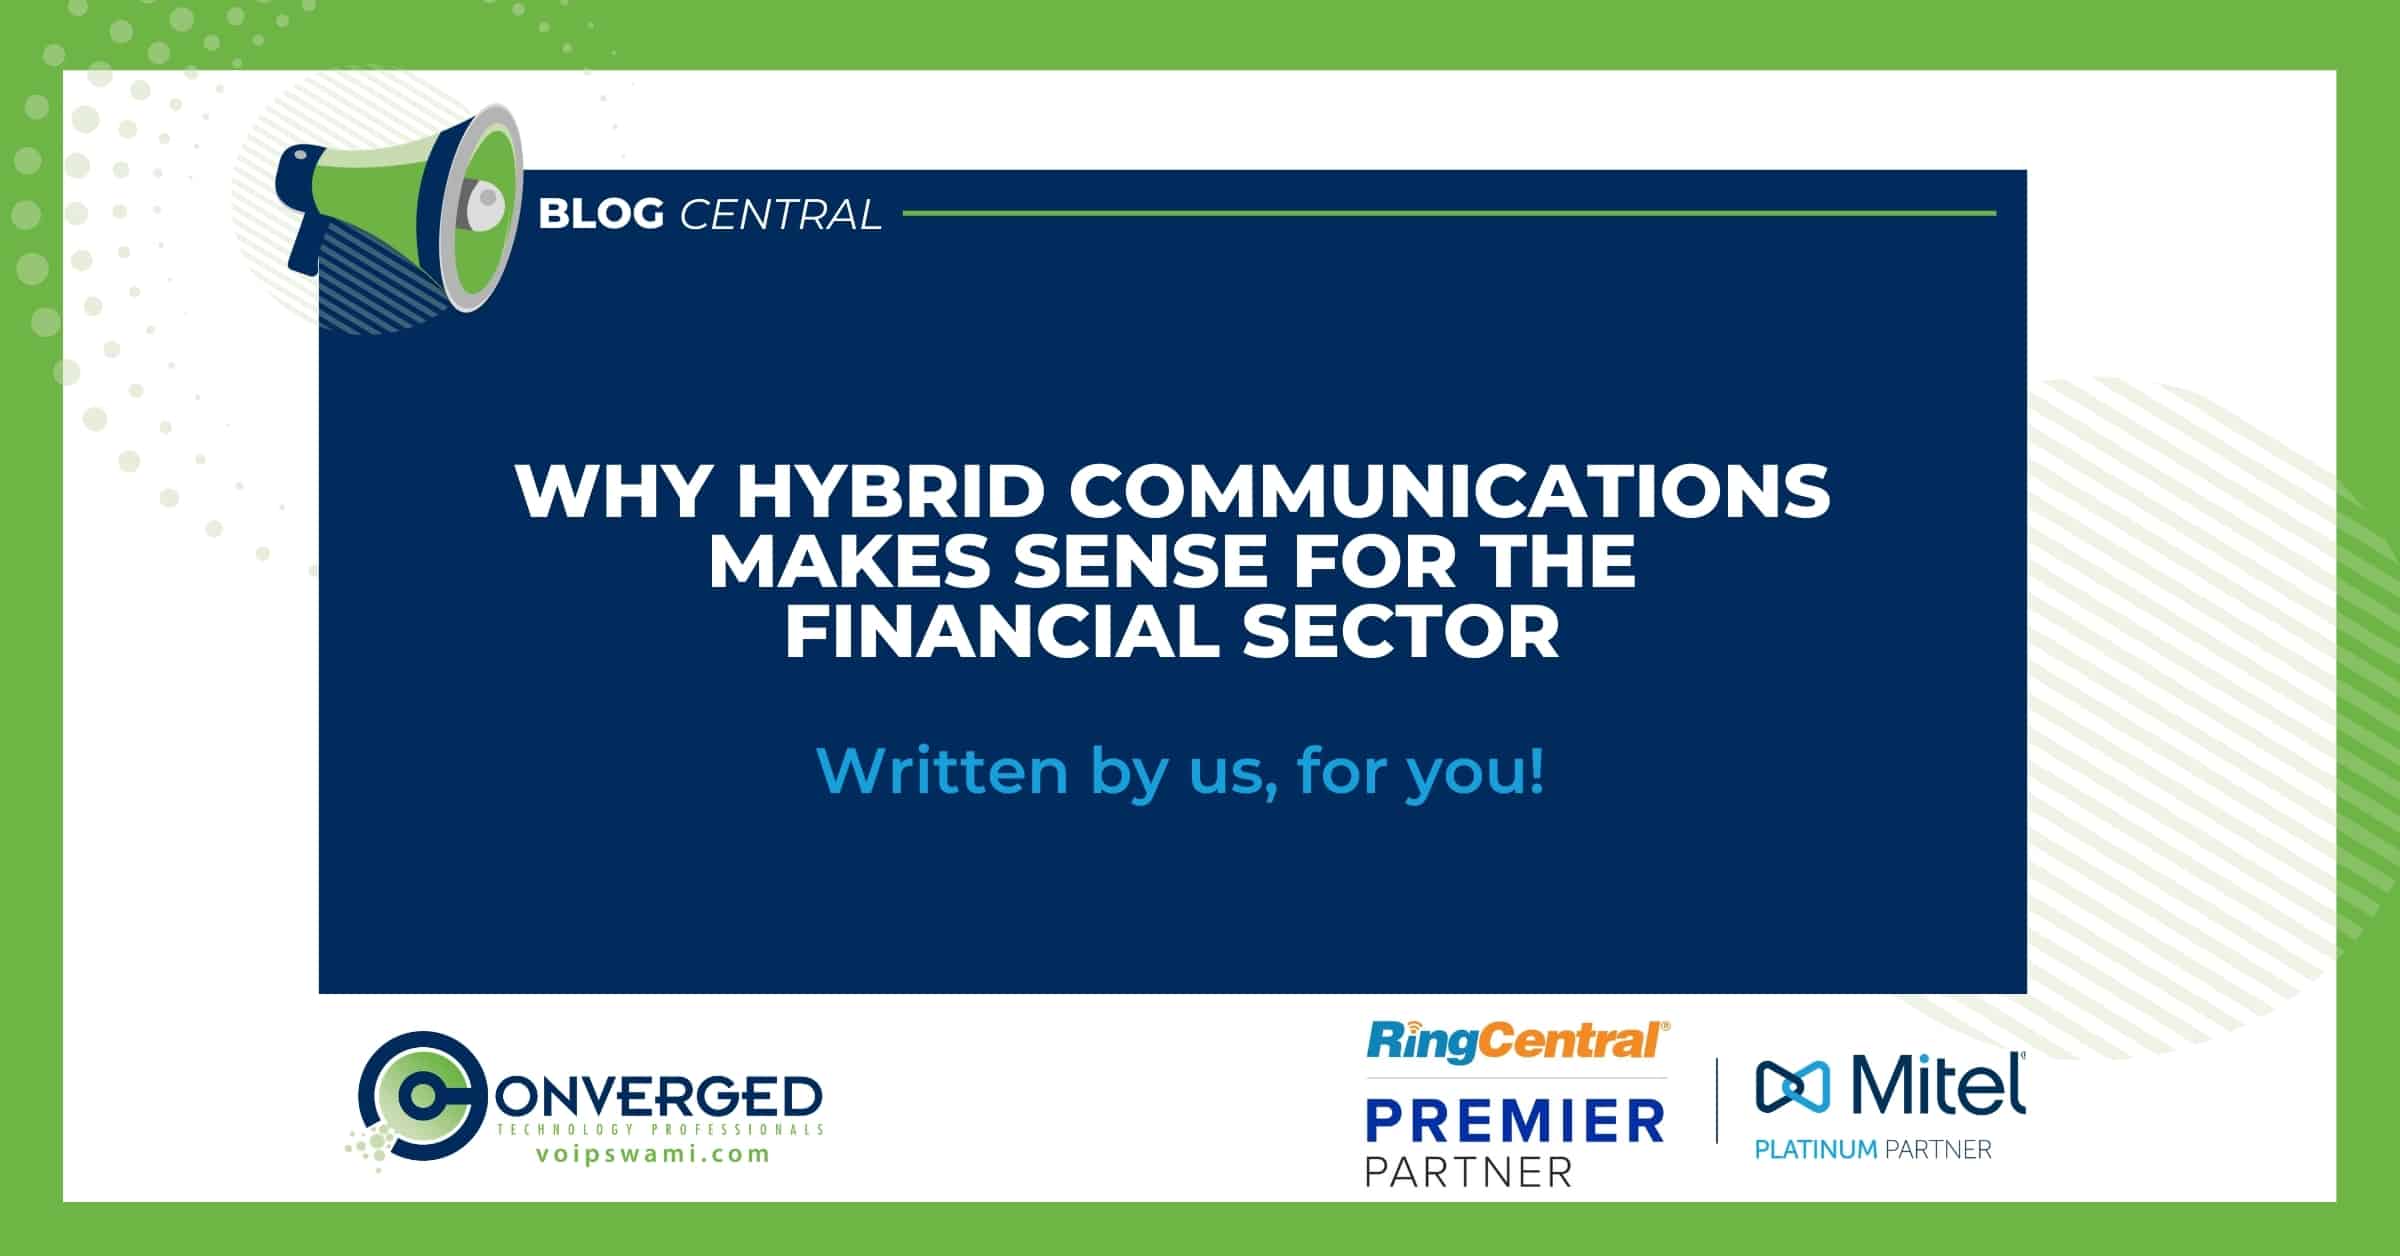 Why Hybrid Communications Makes Sense For the Financial Sector